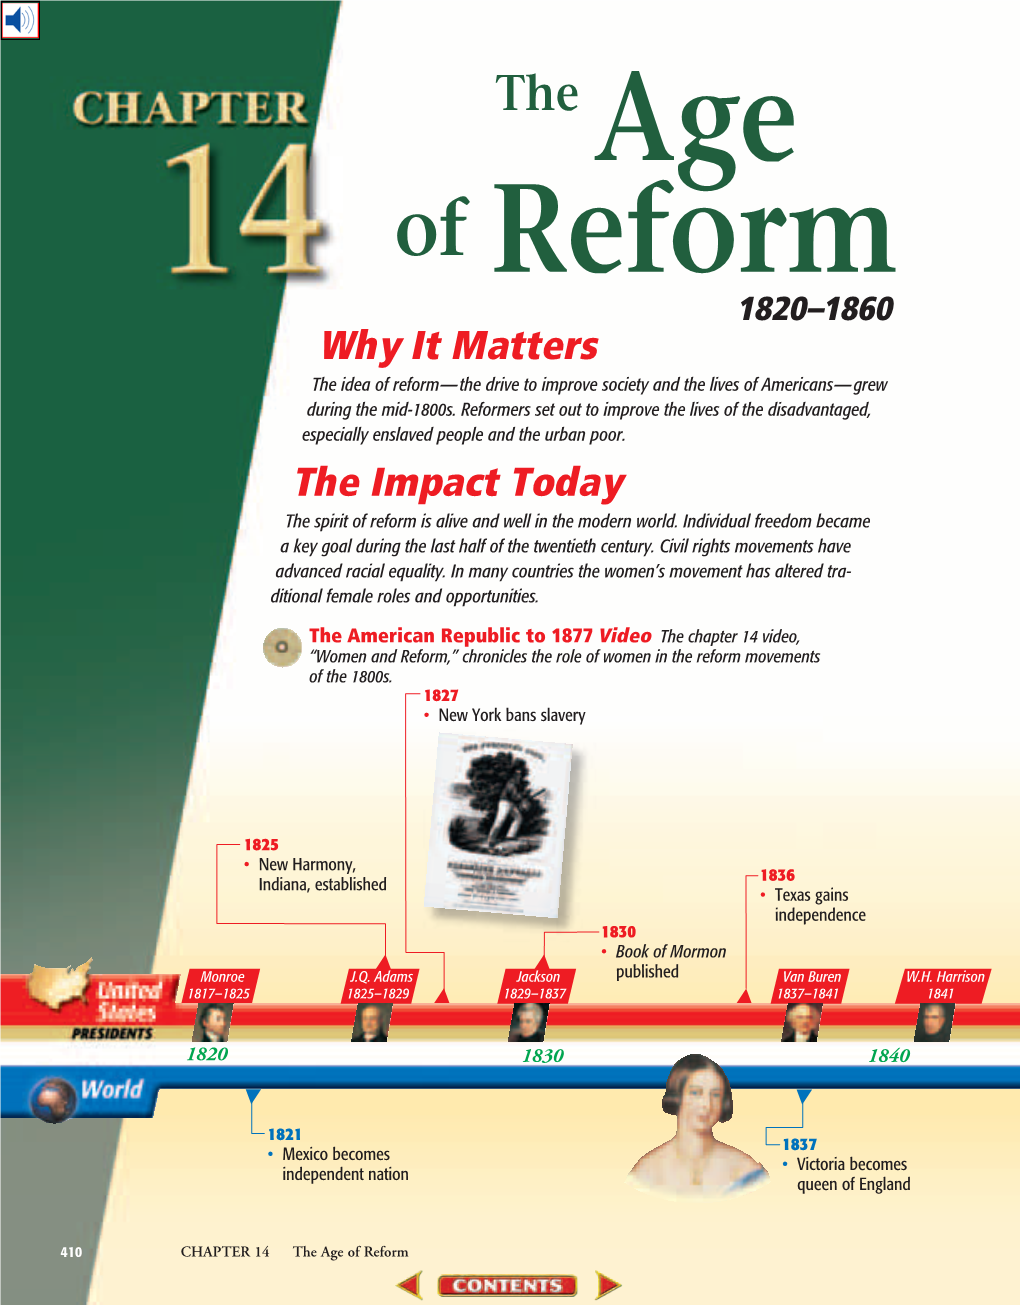 Chapter 14: the Age of Reform, 1820-1860